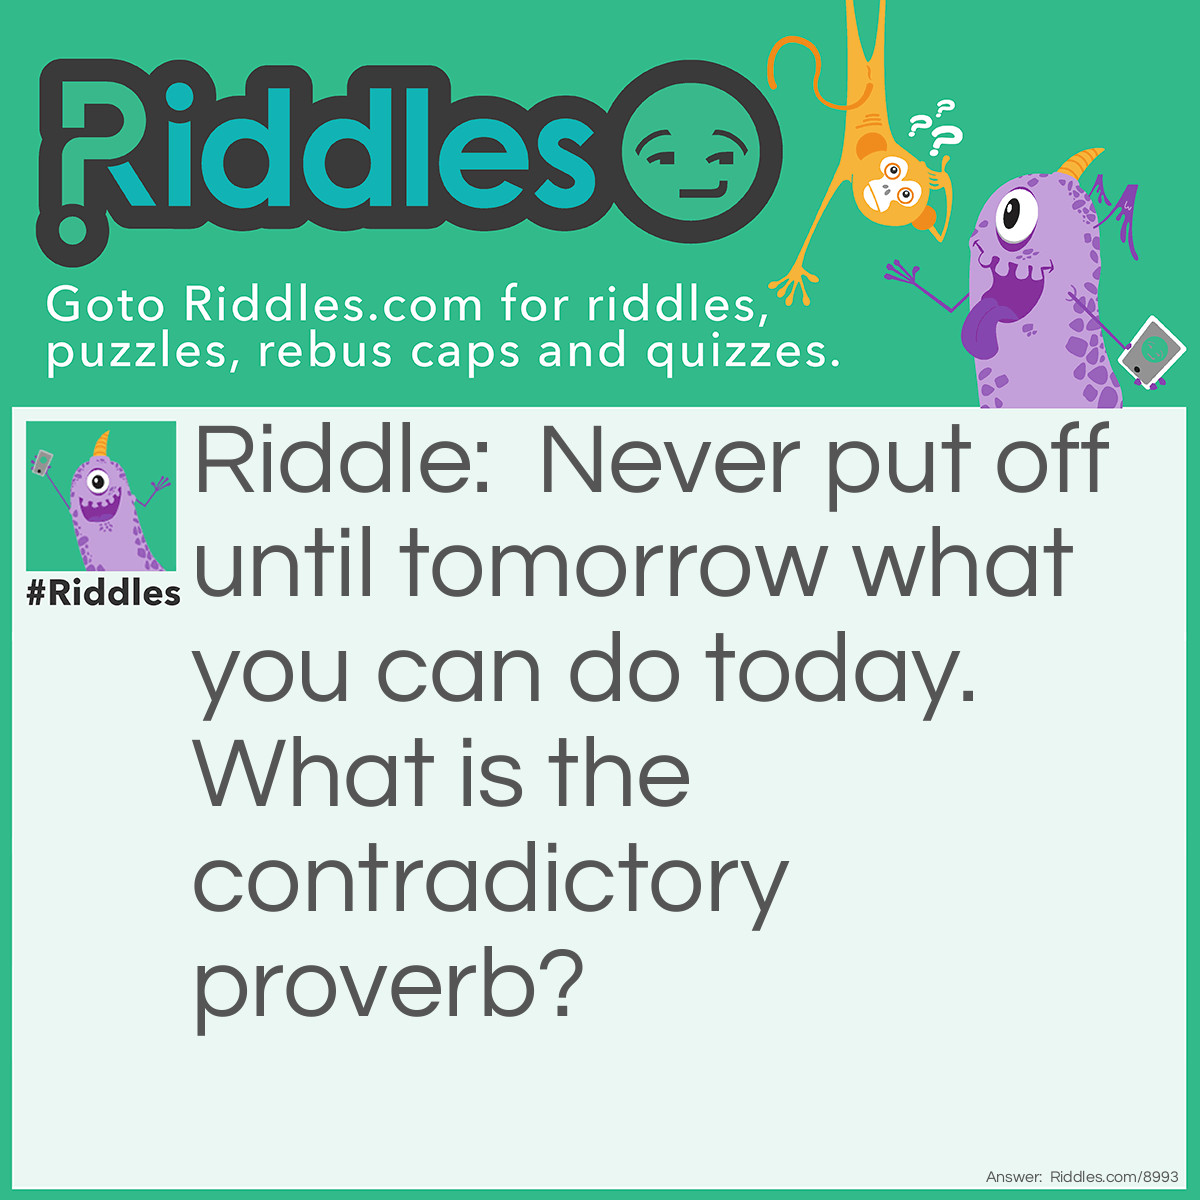 Riddle: Never put off until tomorrow what you can do today. What is the contradictory proverb? Answer: Don't cross the bridge until you come to it.